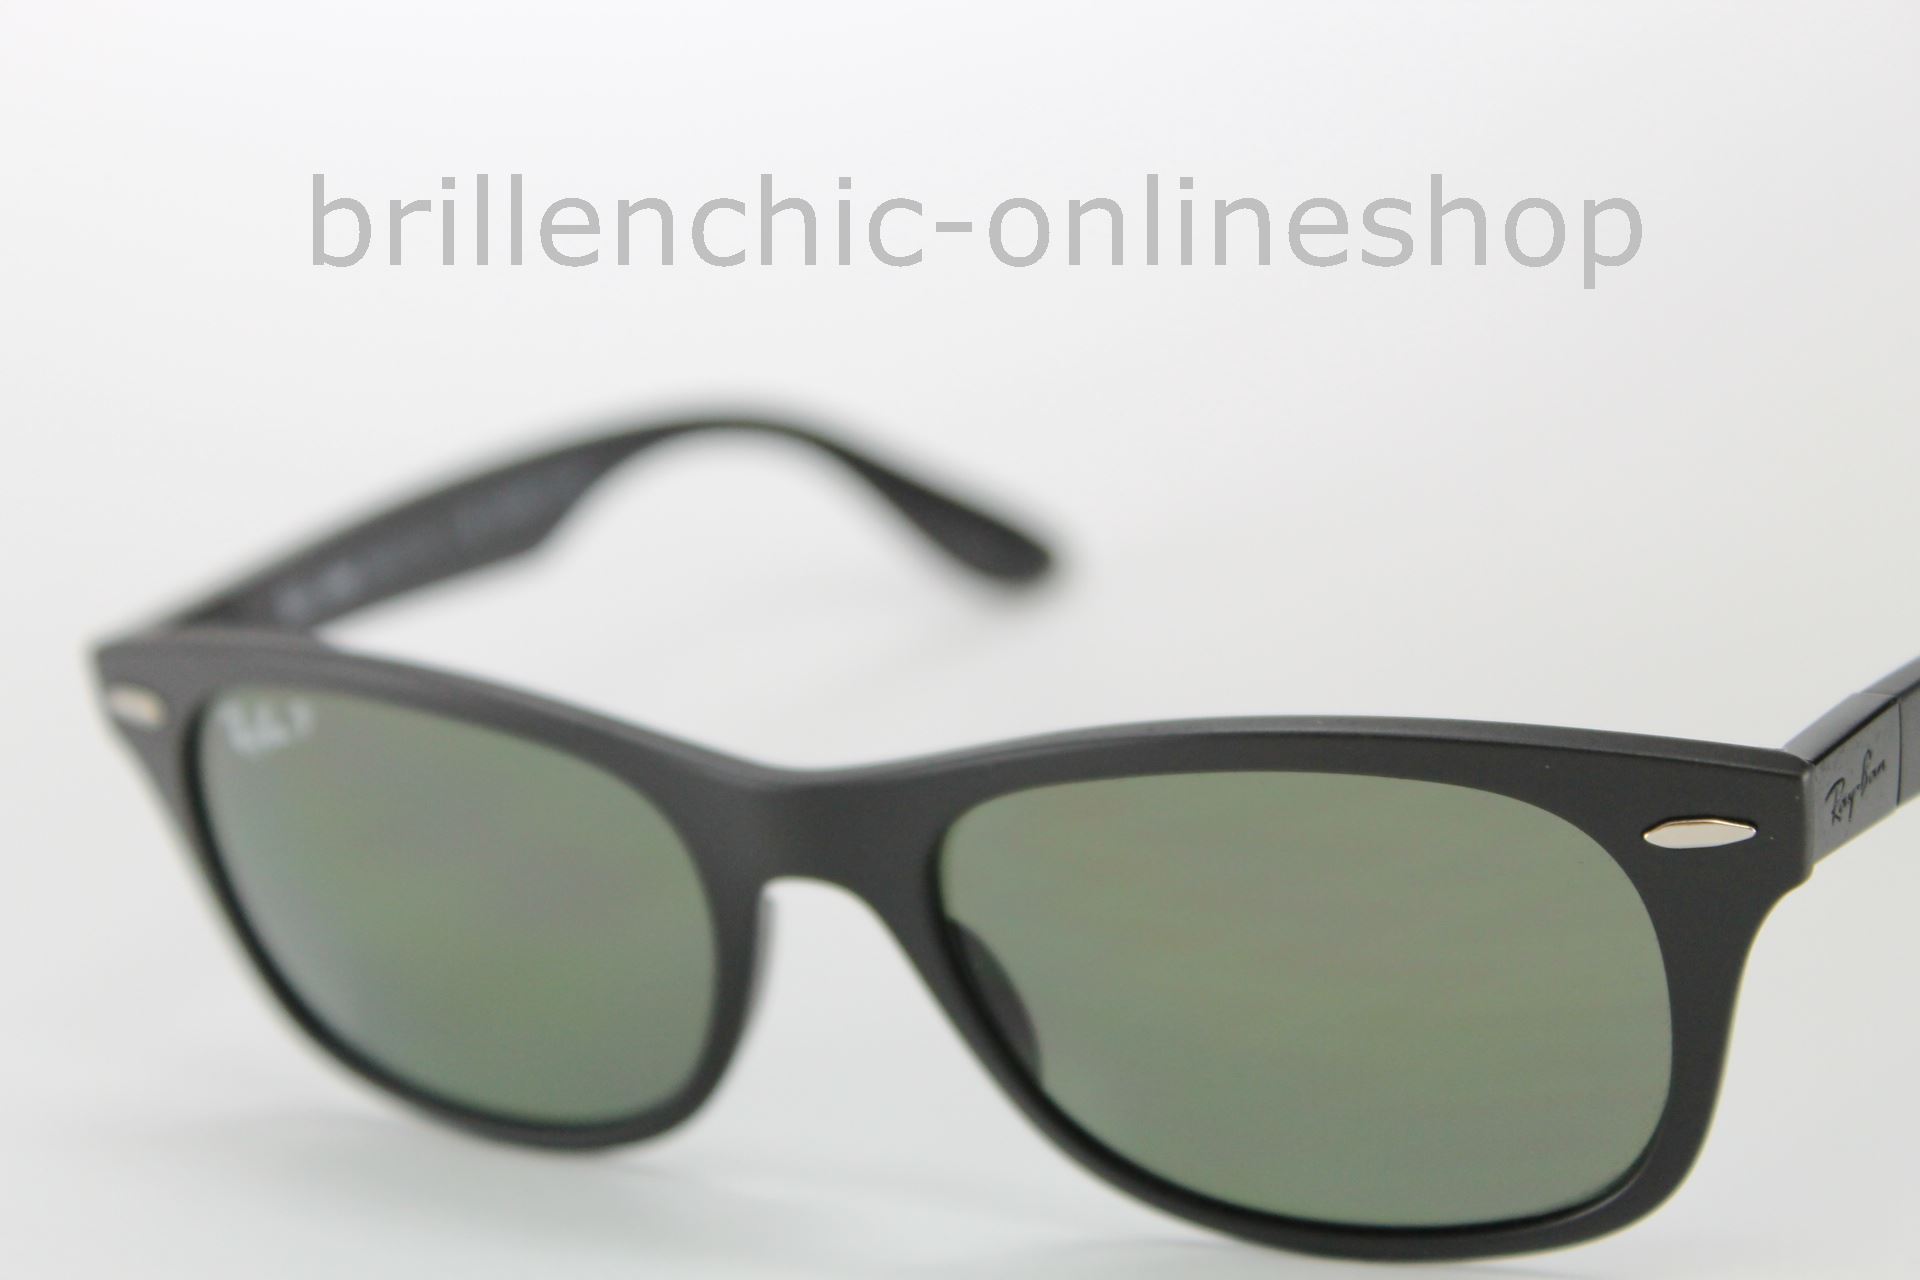 Brillenchic-onlineshop in Berlin - Ray Ban LITEFORCE RB 4207 601S/9A -  POLARIZED 